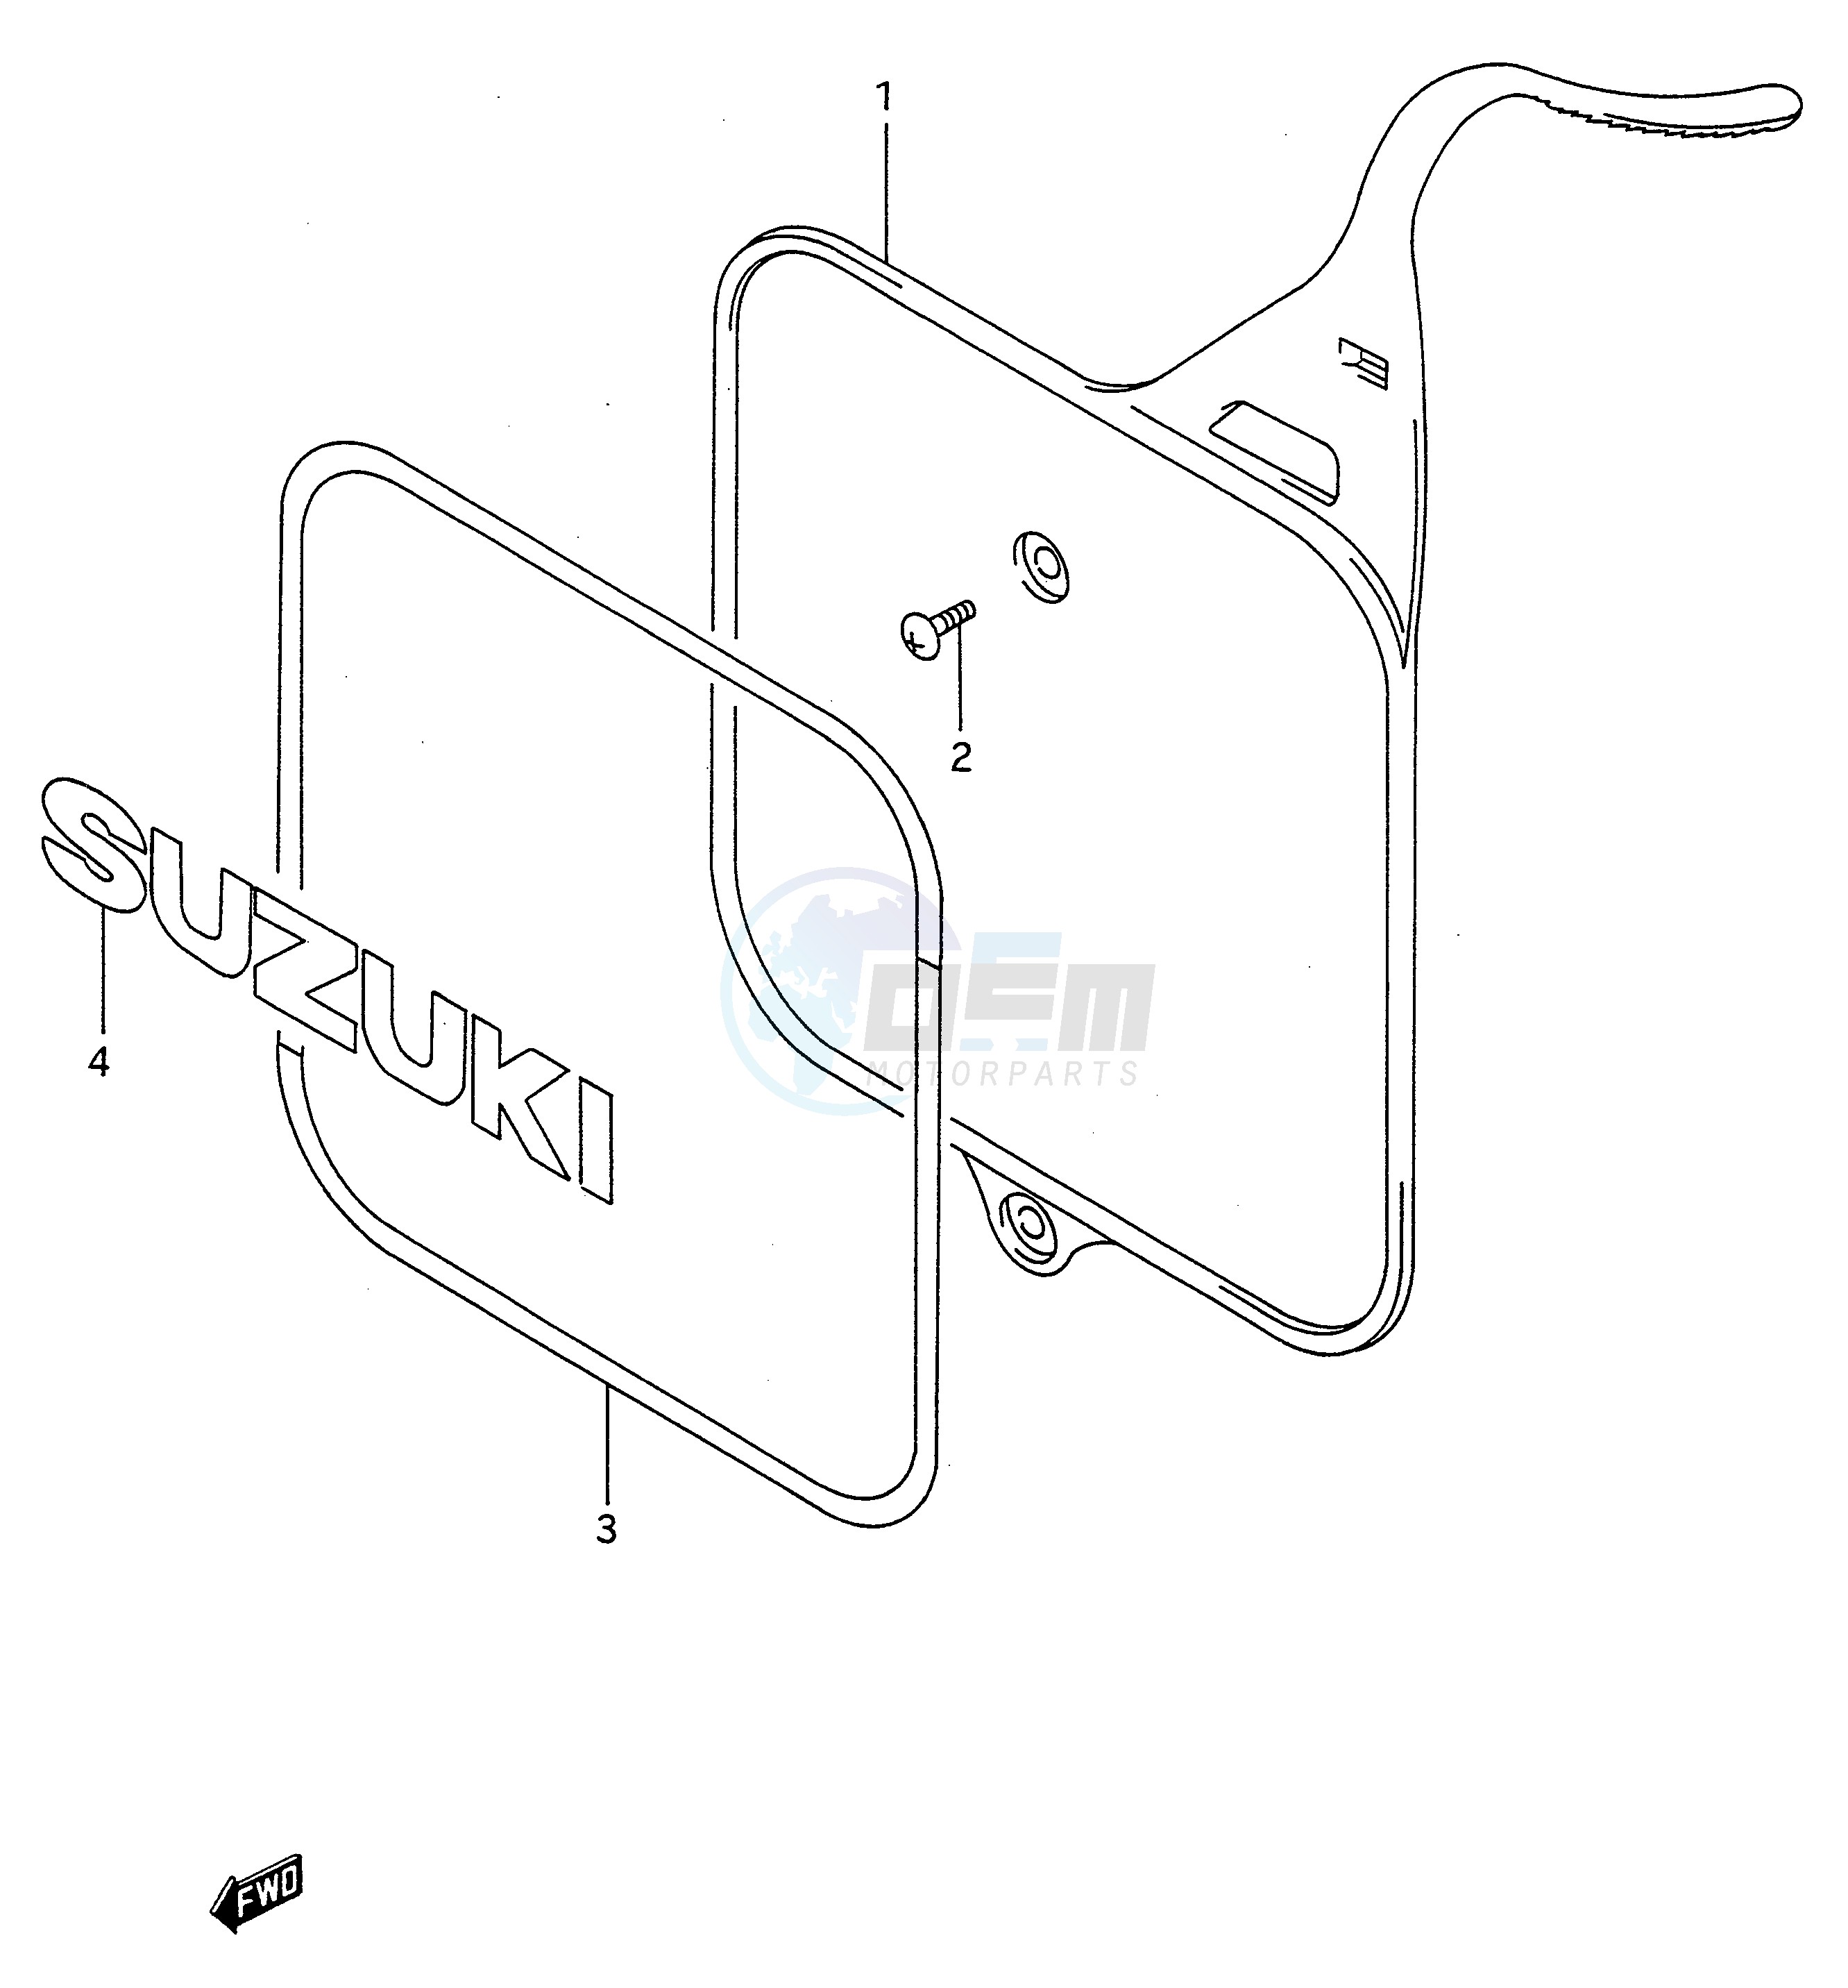 FRONT NUMBER PLATE blueprint